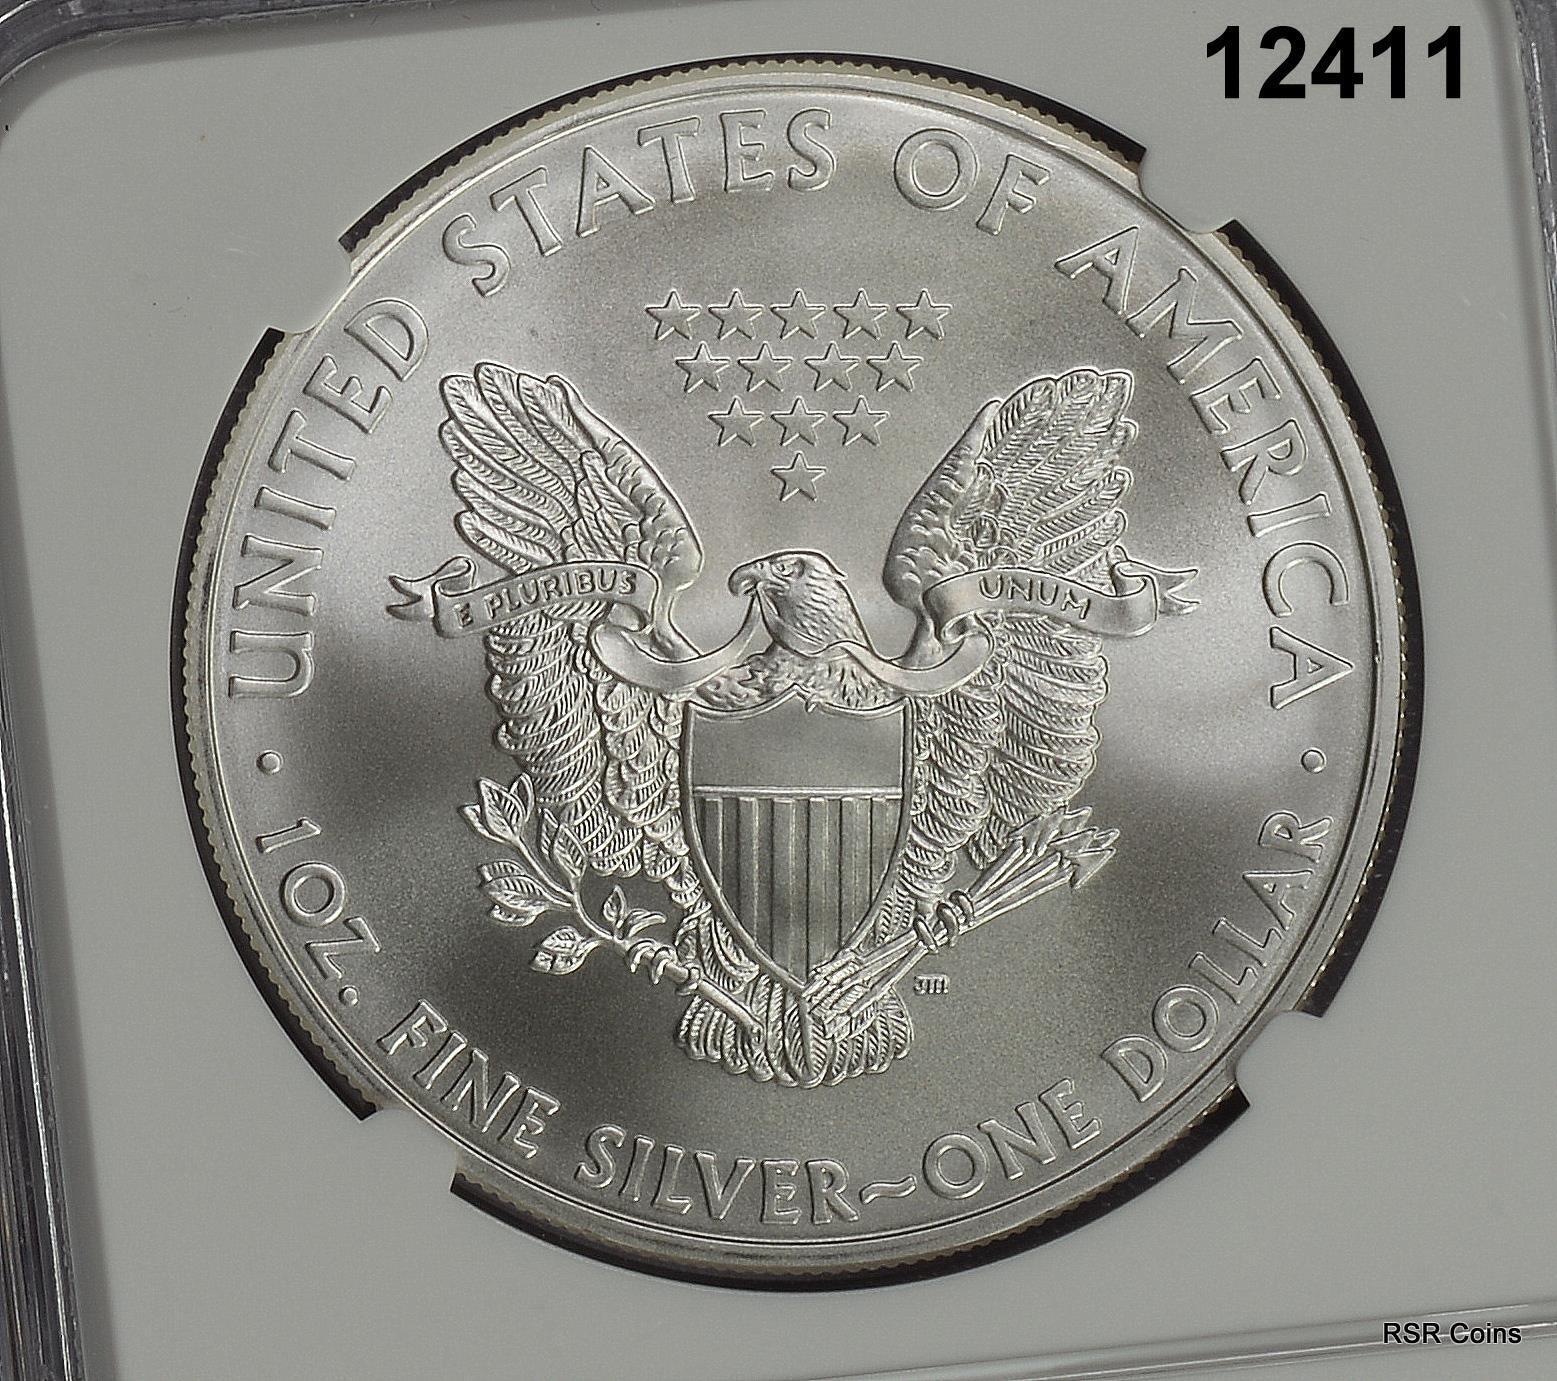 2008 SILVER EAGLE NGC CERTIFIED MS70 PERFECT! #12411